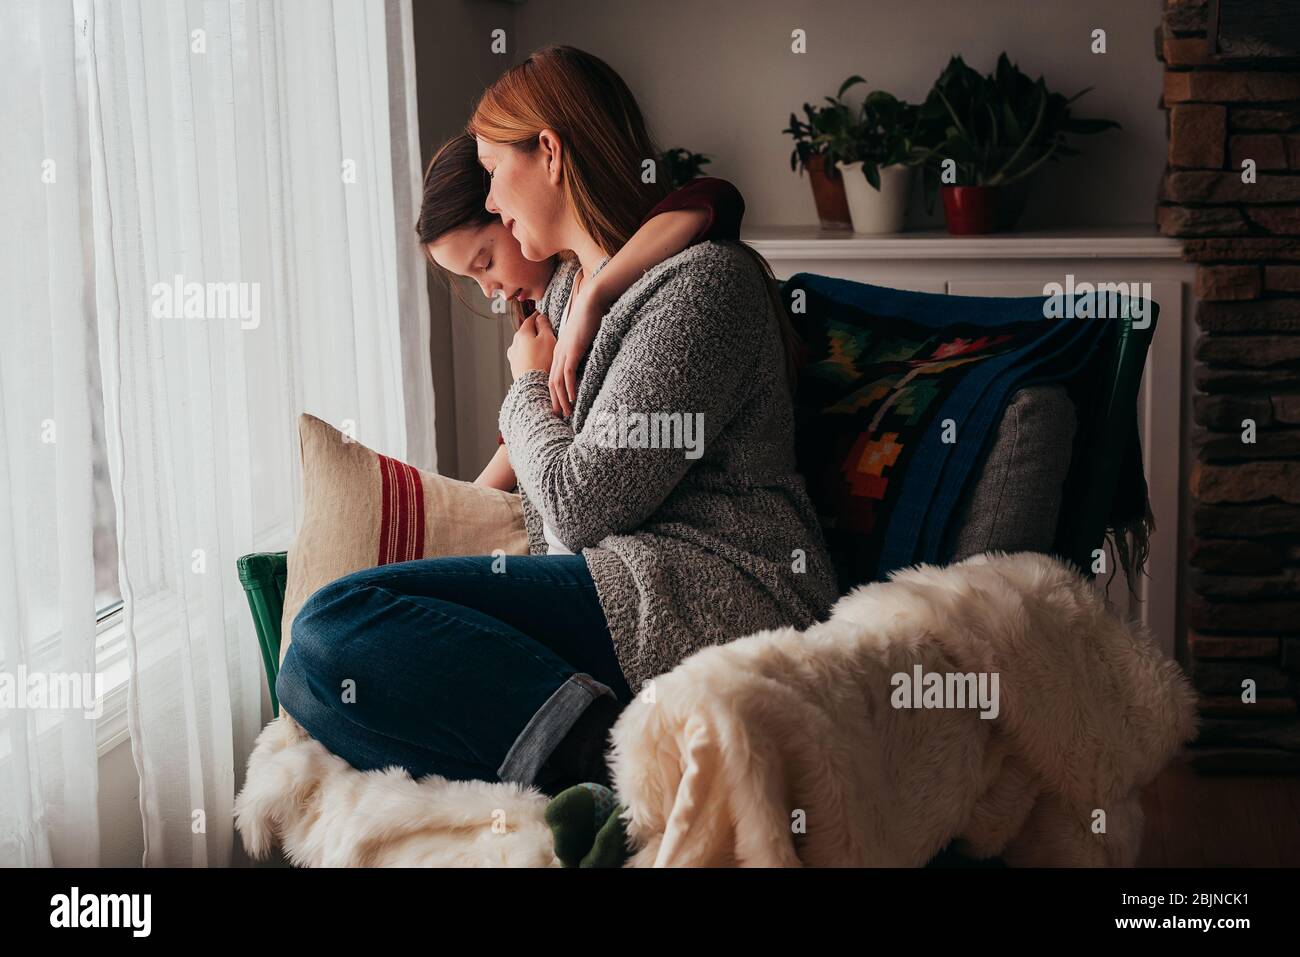 Girl hugging her mother sitting in an armchair Stock Photo